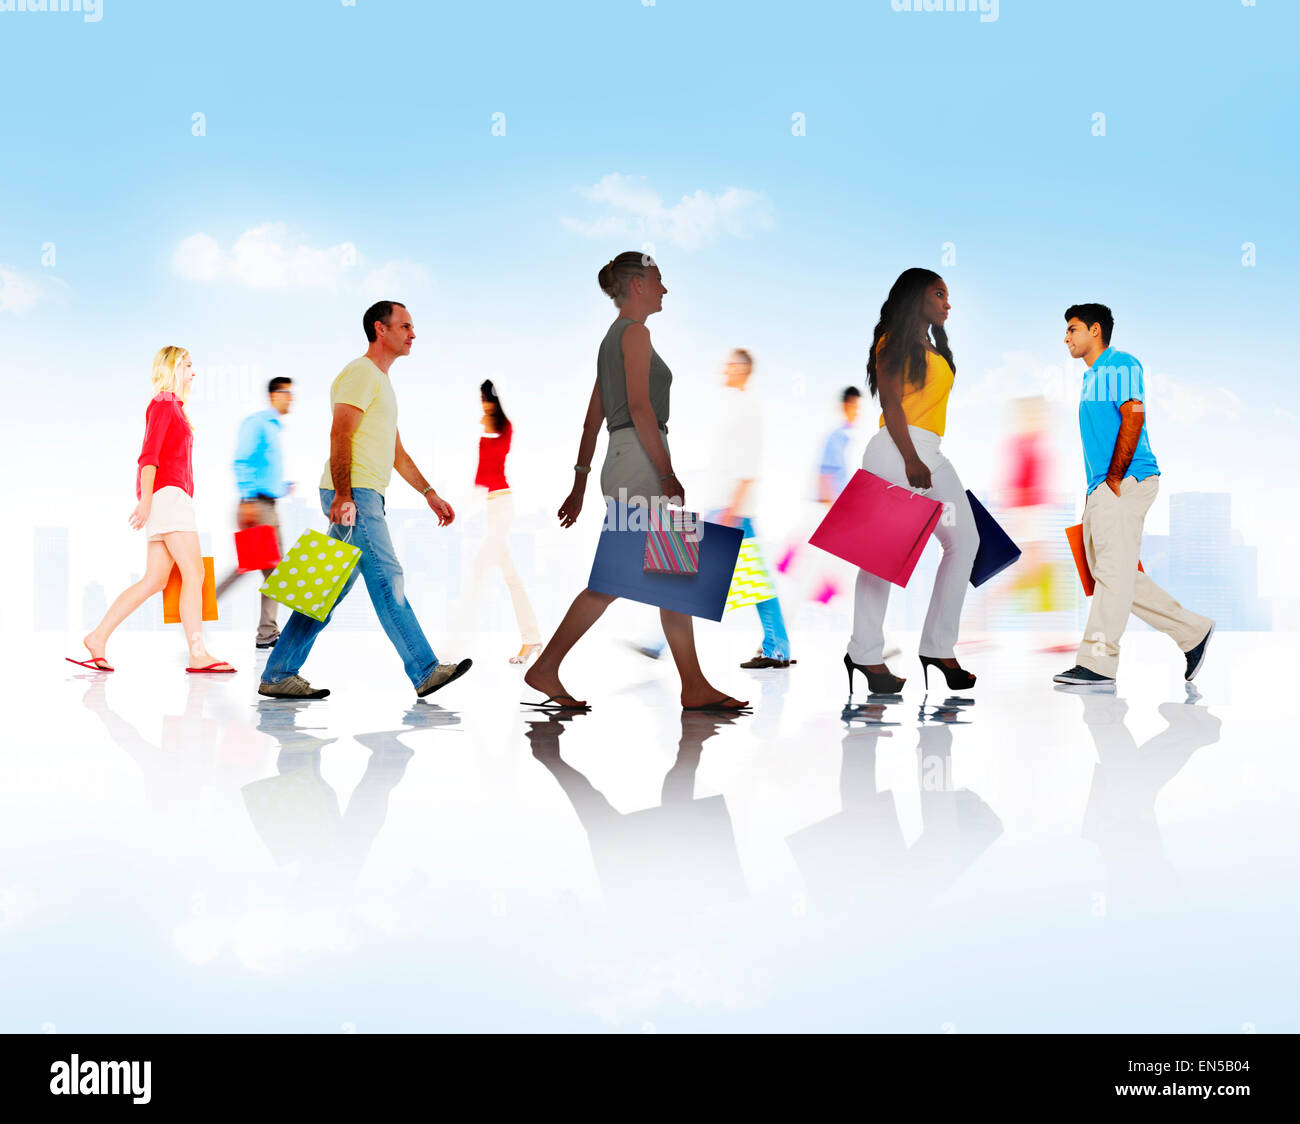 Group of Diverse People Walking with Shopping Bags Stock Photo